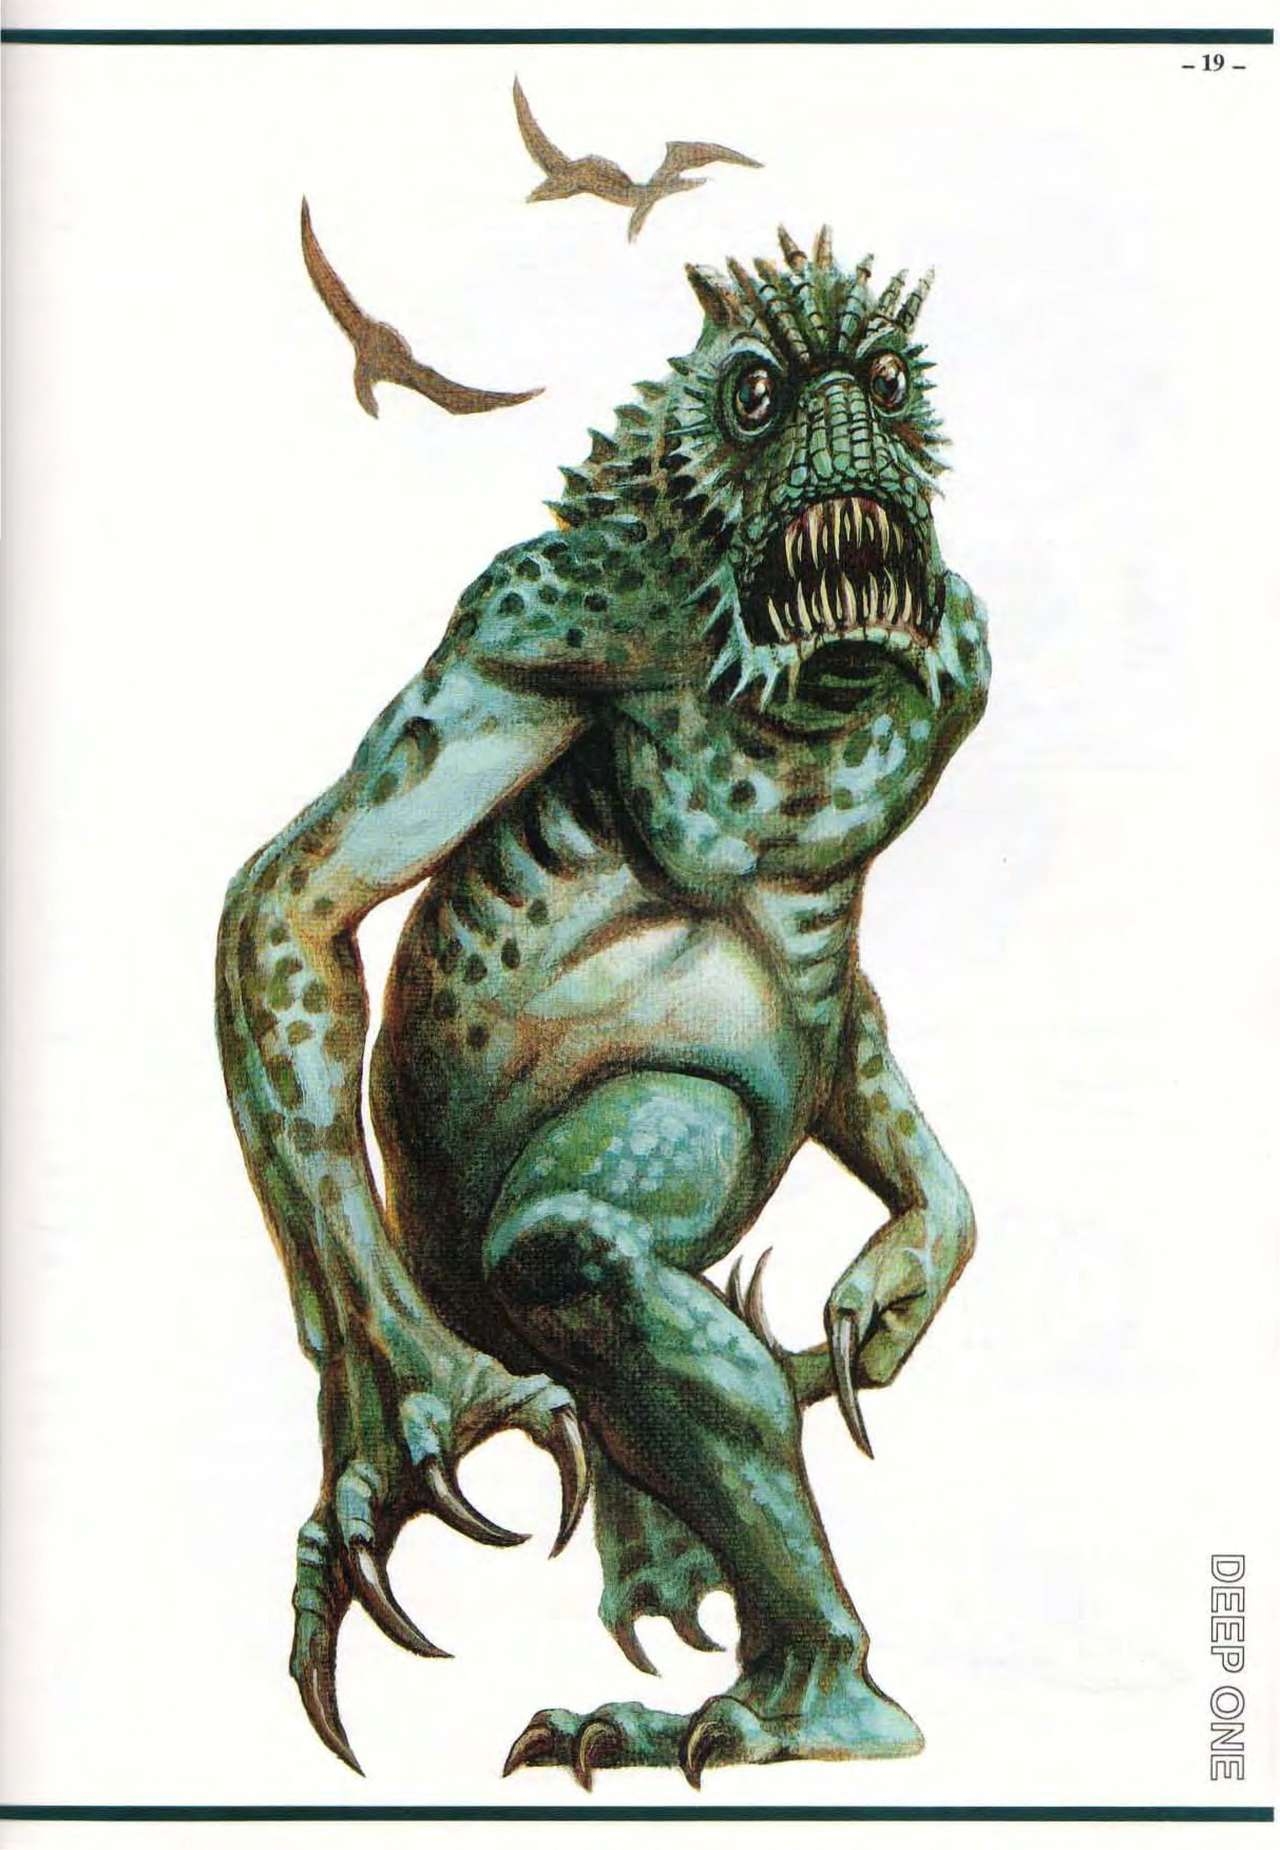 S. Petersen's Field Guide to Cthulhu Monsters 18